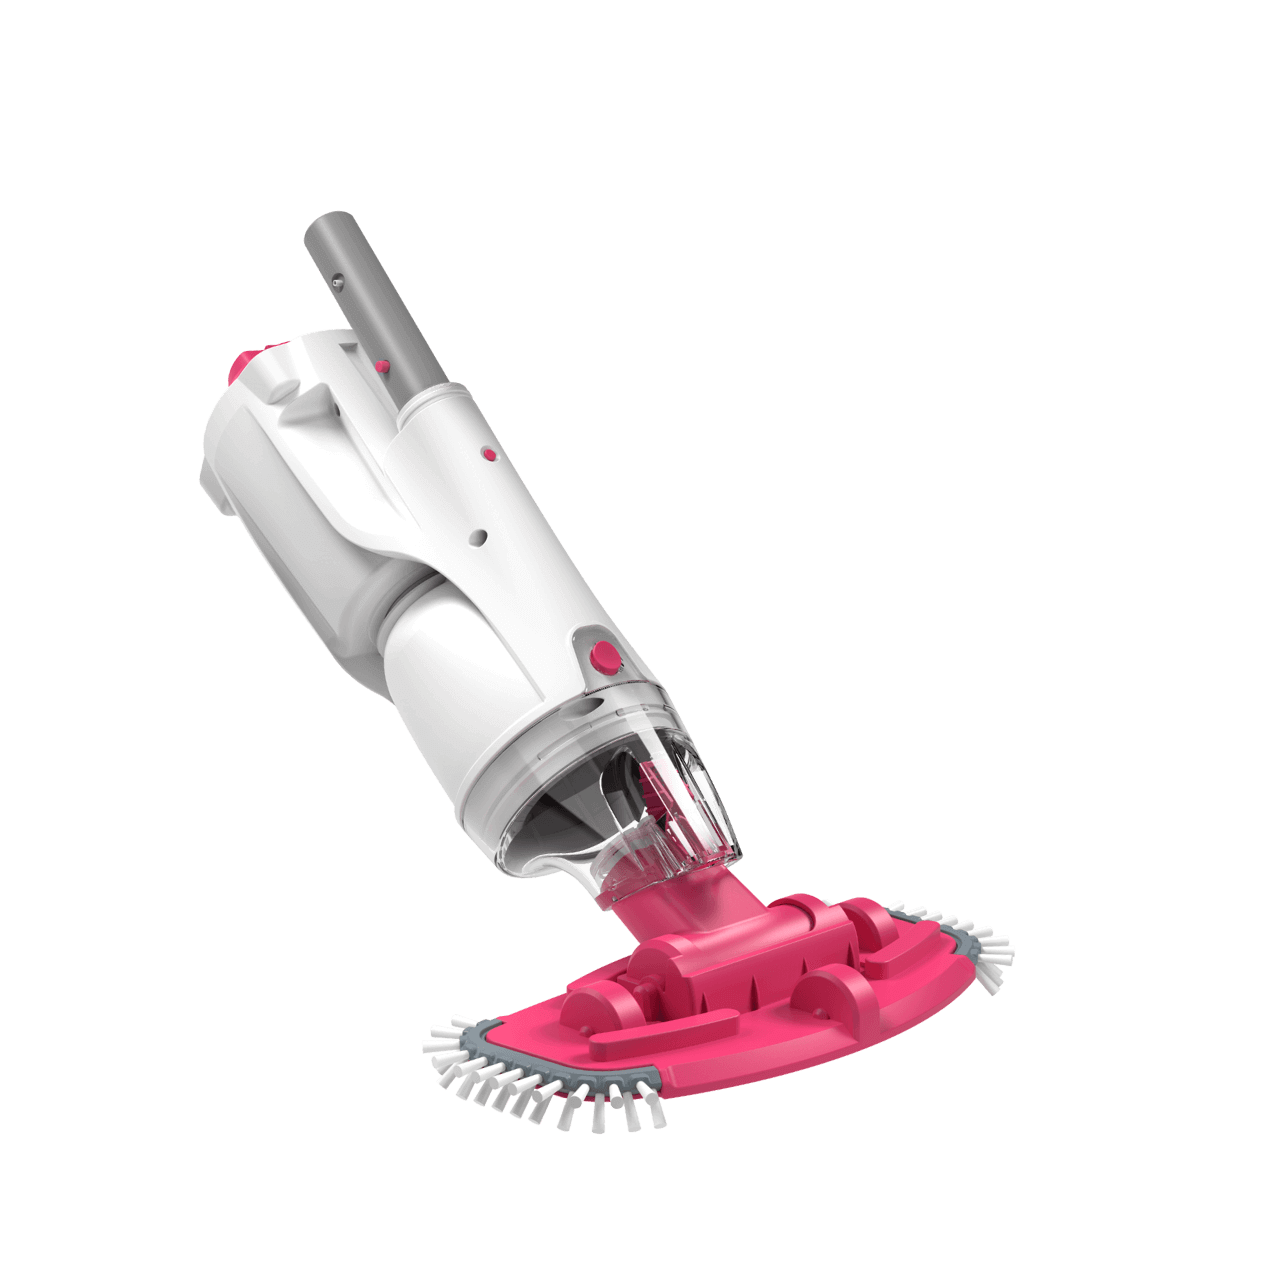 BWT BC30 pool vacuum cleaner in red and white for cleaning pools